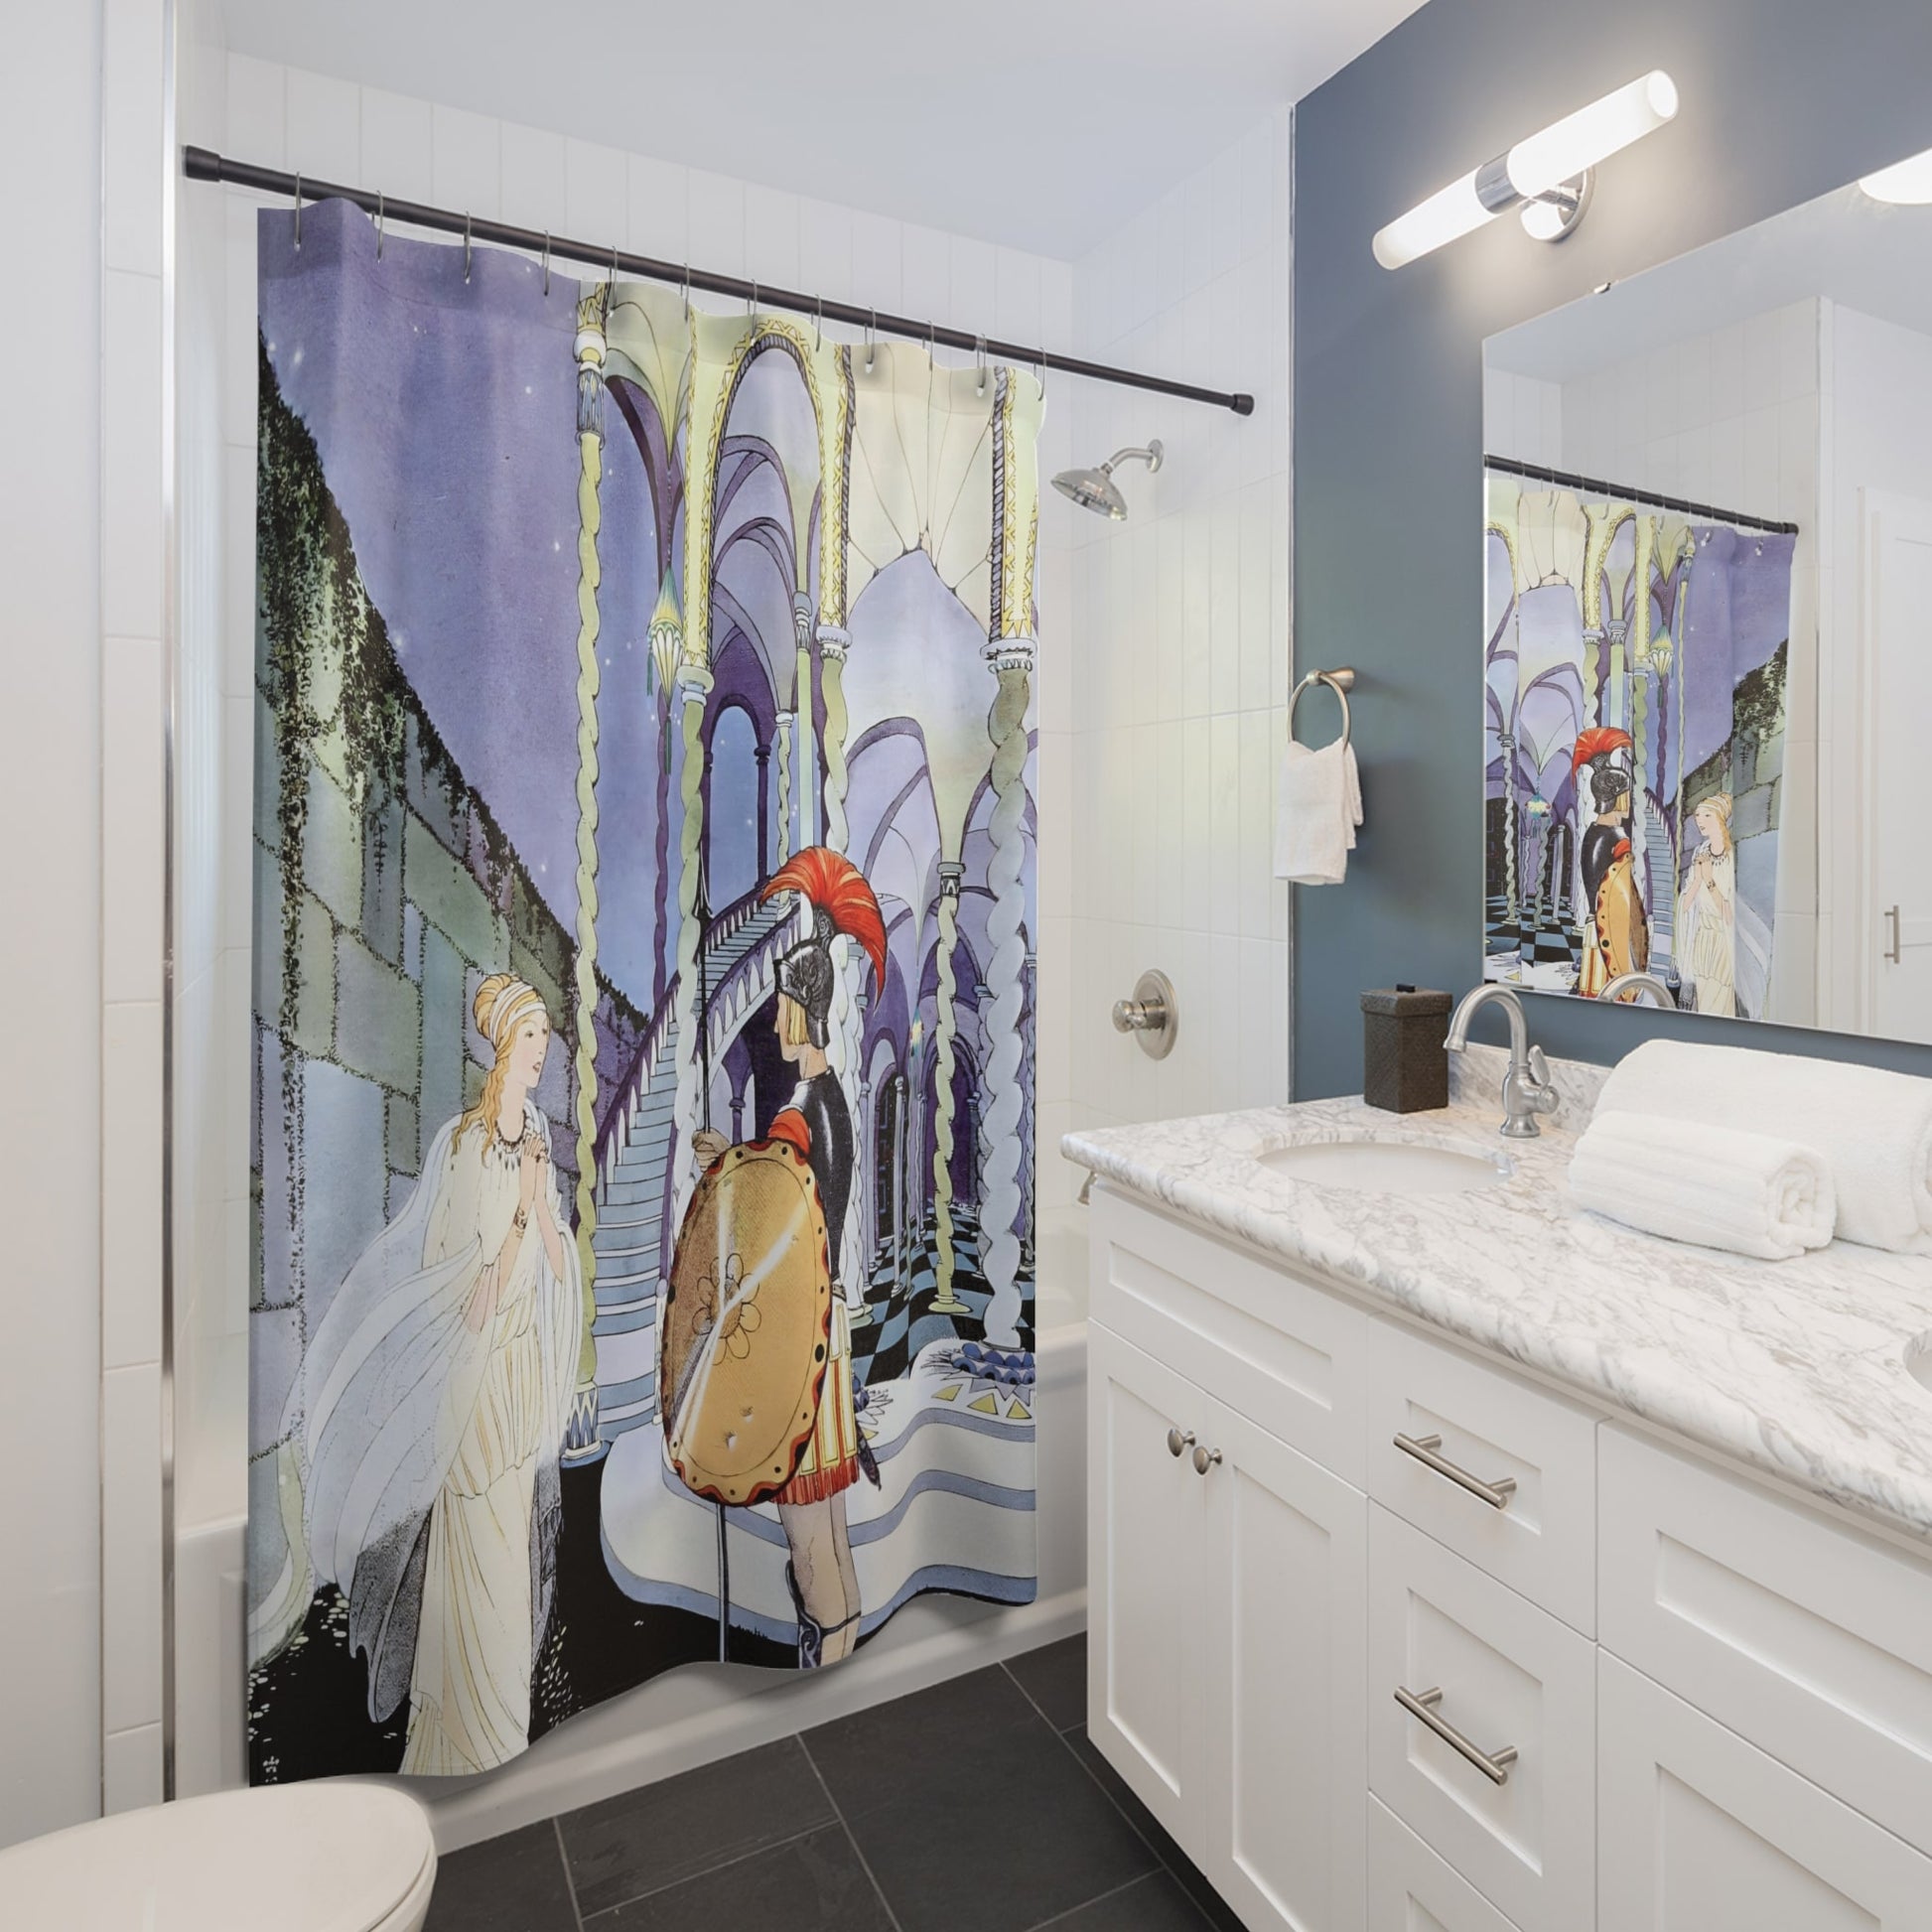 Princess and the Knight Shower Curtain Best Bathroom Decorating Ideas for Art Nouveau Decor